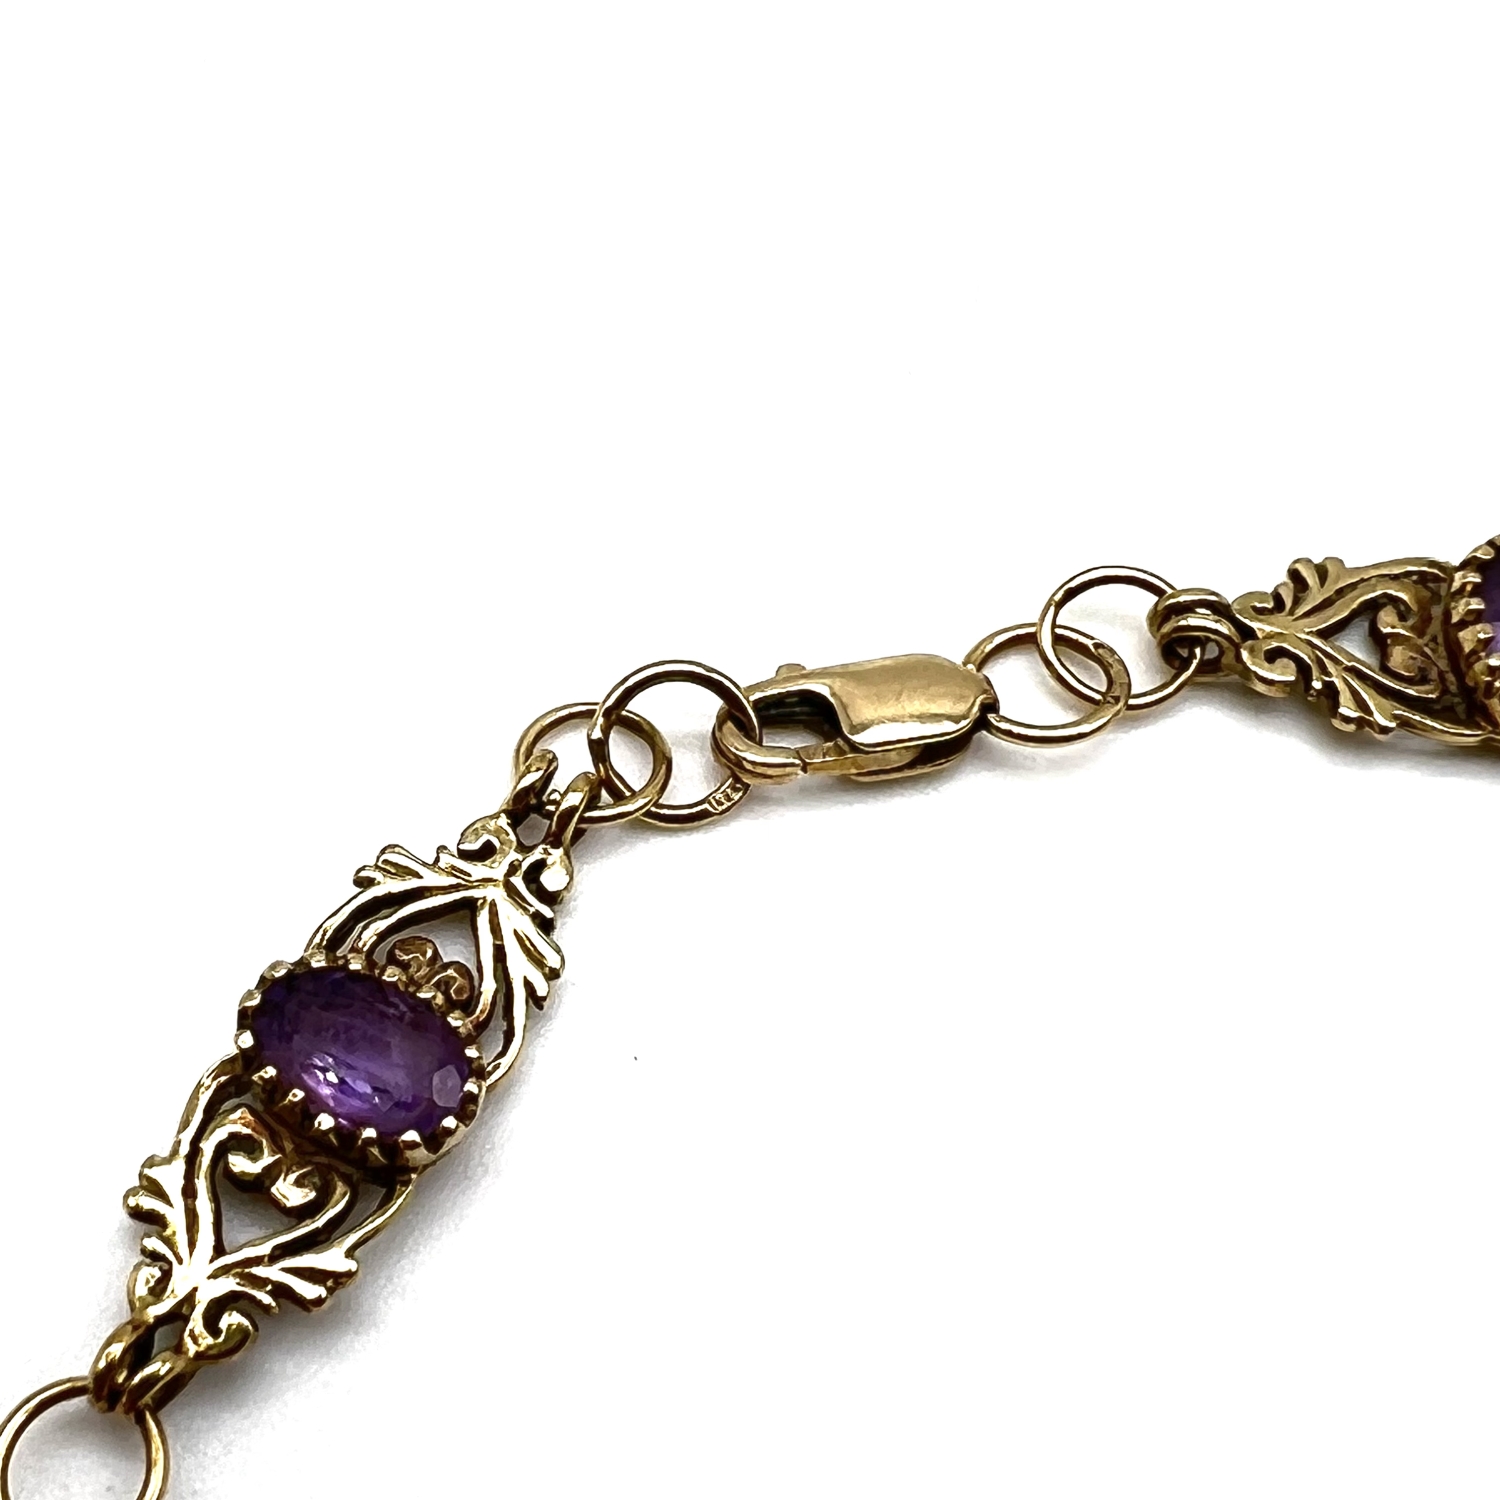 Fine 9ct gold and amethyst bracelet. Marked for 9ct gold and set with amethyst stones. Measures 19. - Image 5 of 5